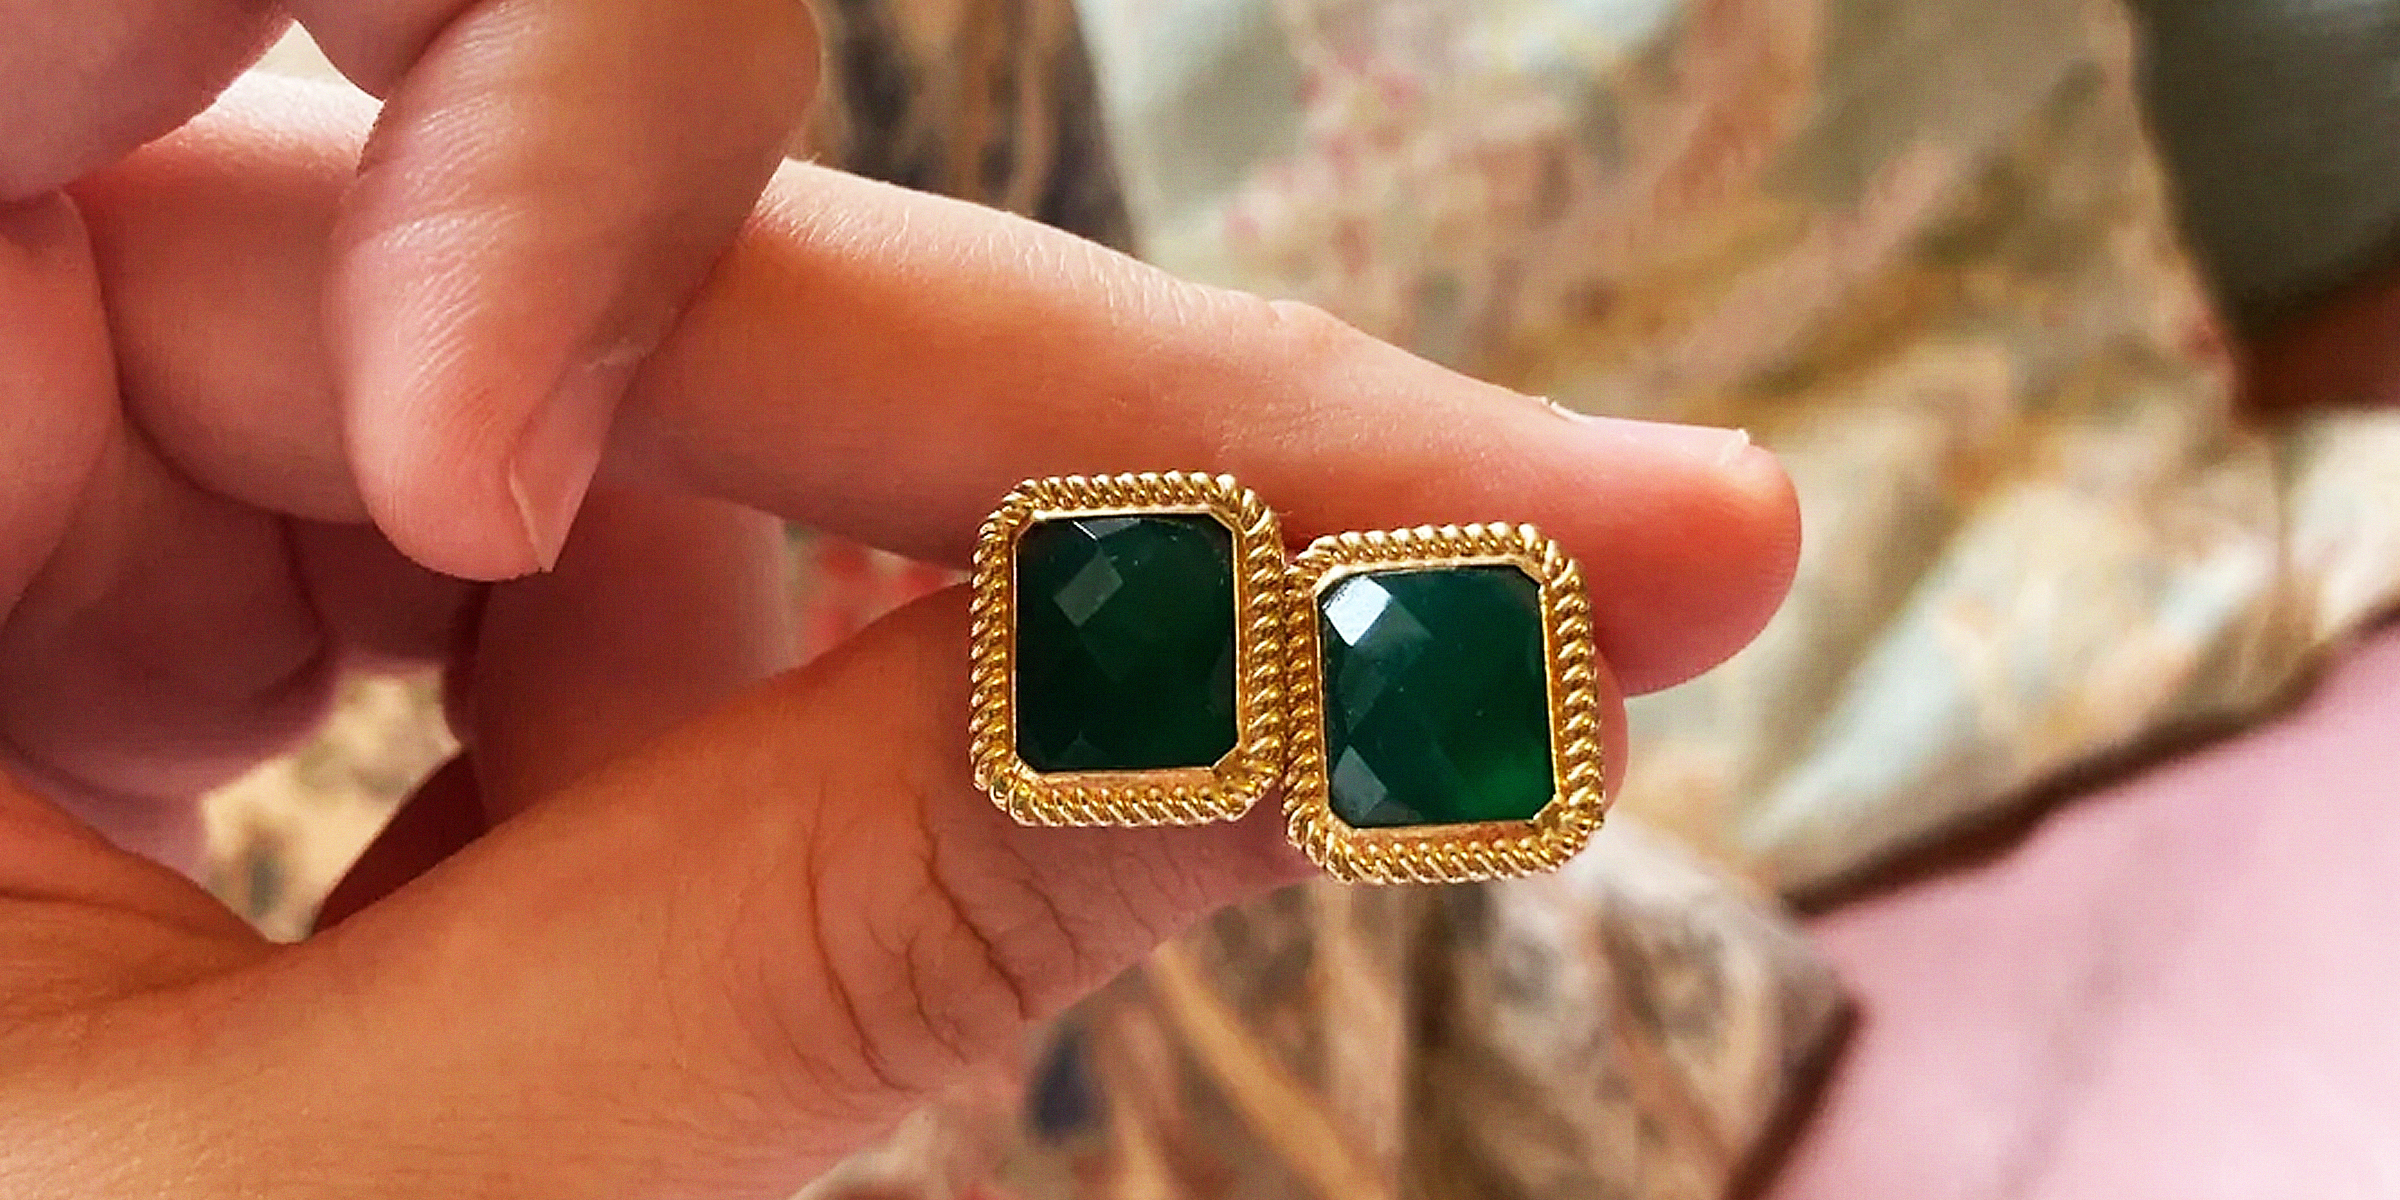 Green and gold earrings | Source: Reddit.com